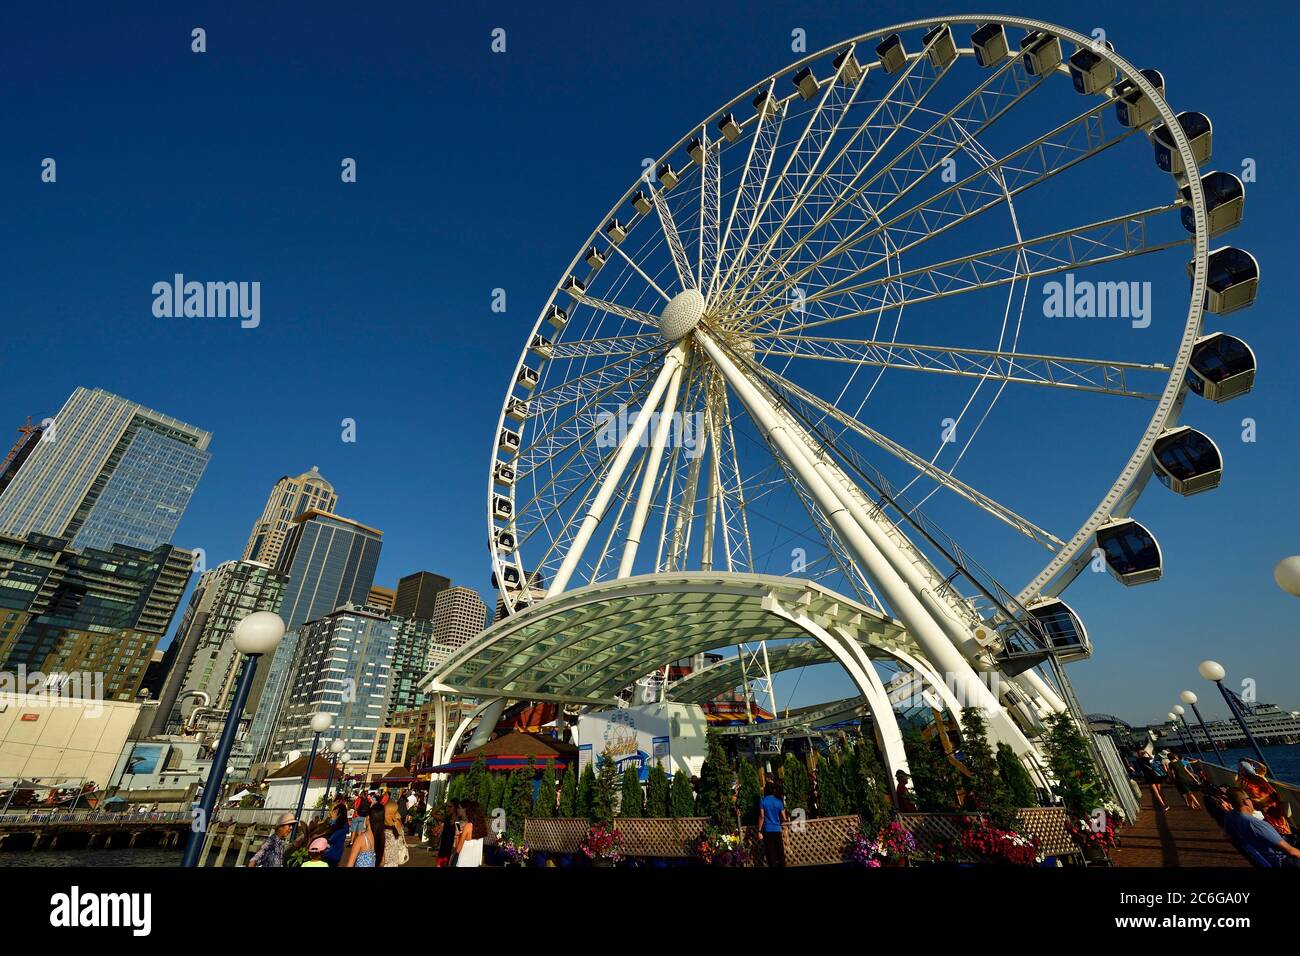 Ferris wheel in the harbour area of Seattle, Washington, United States of America, USA, North America Stock Photo